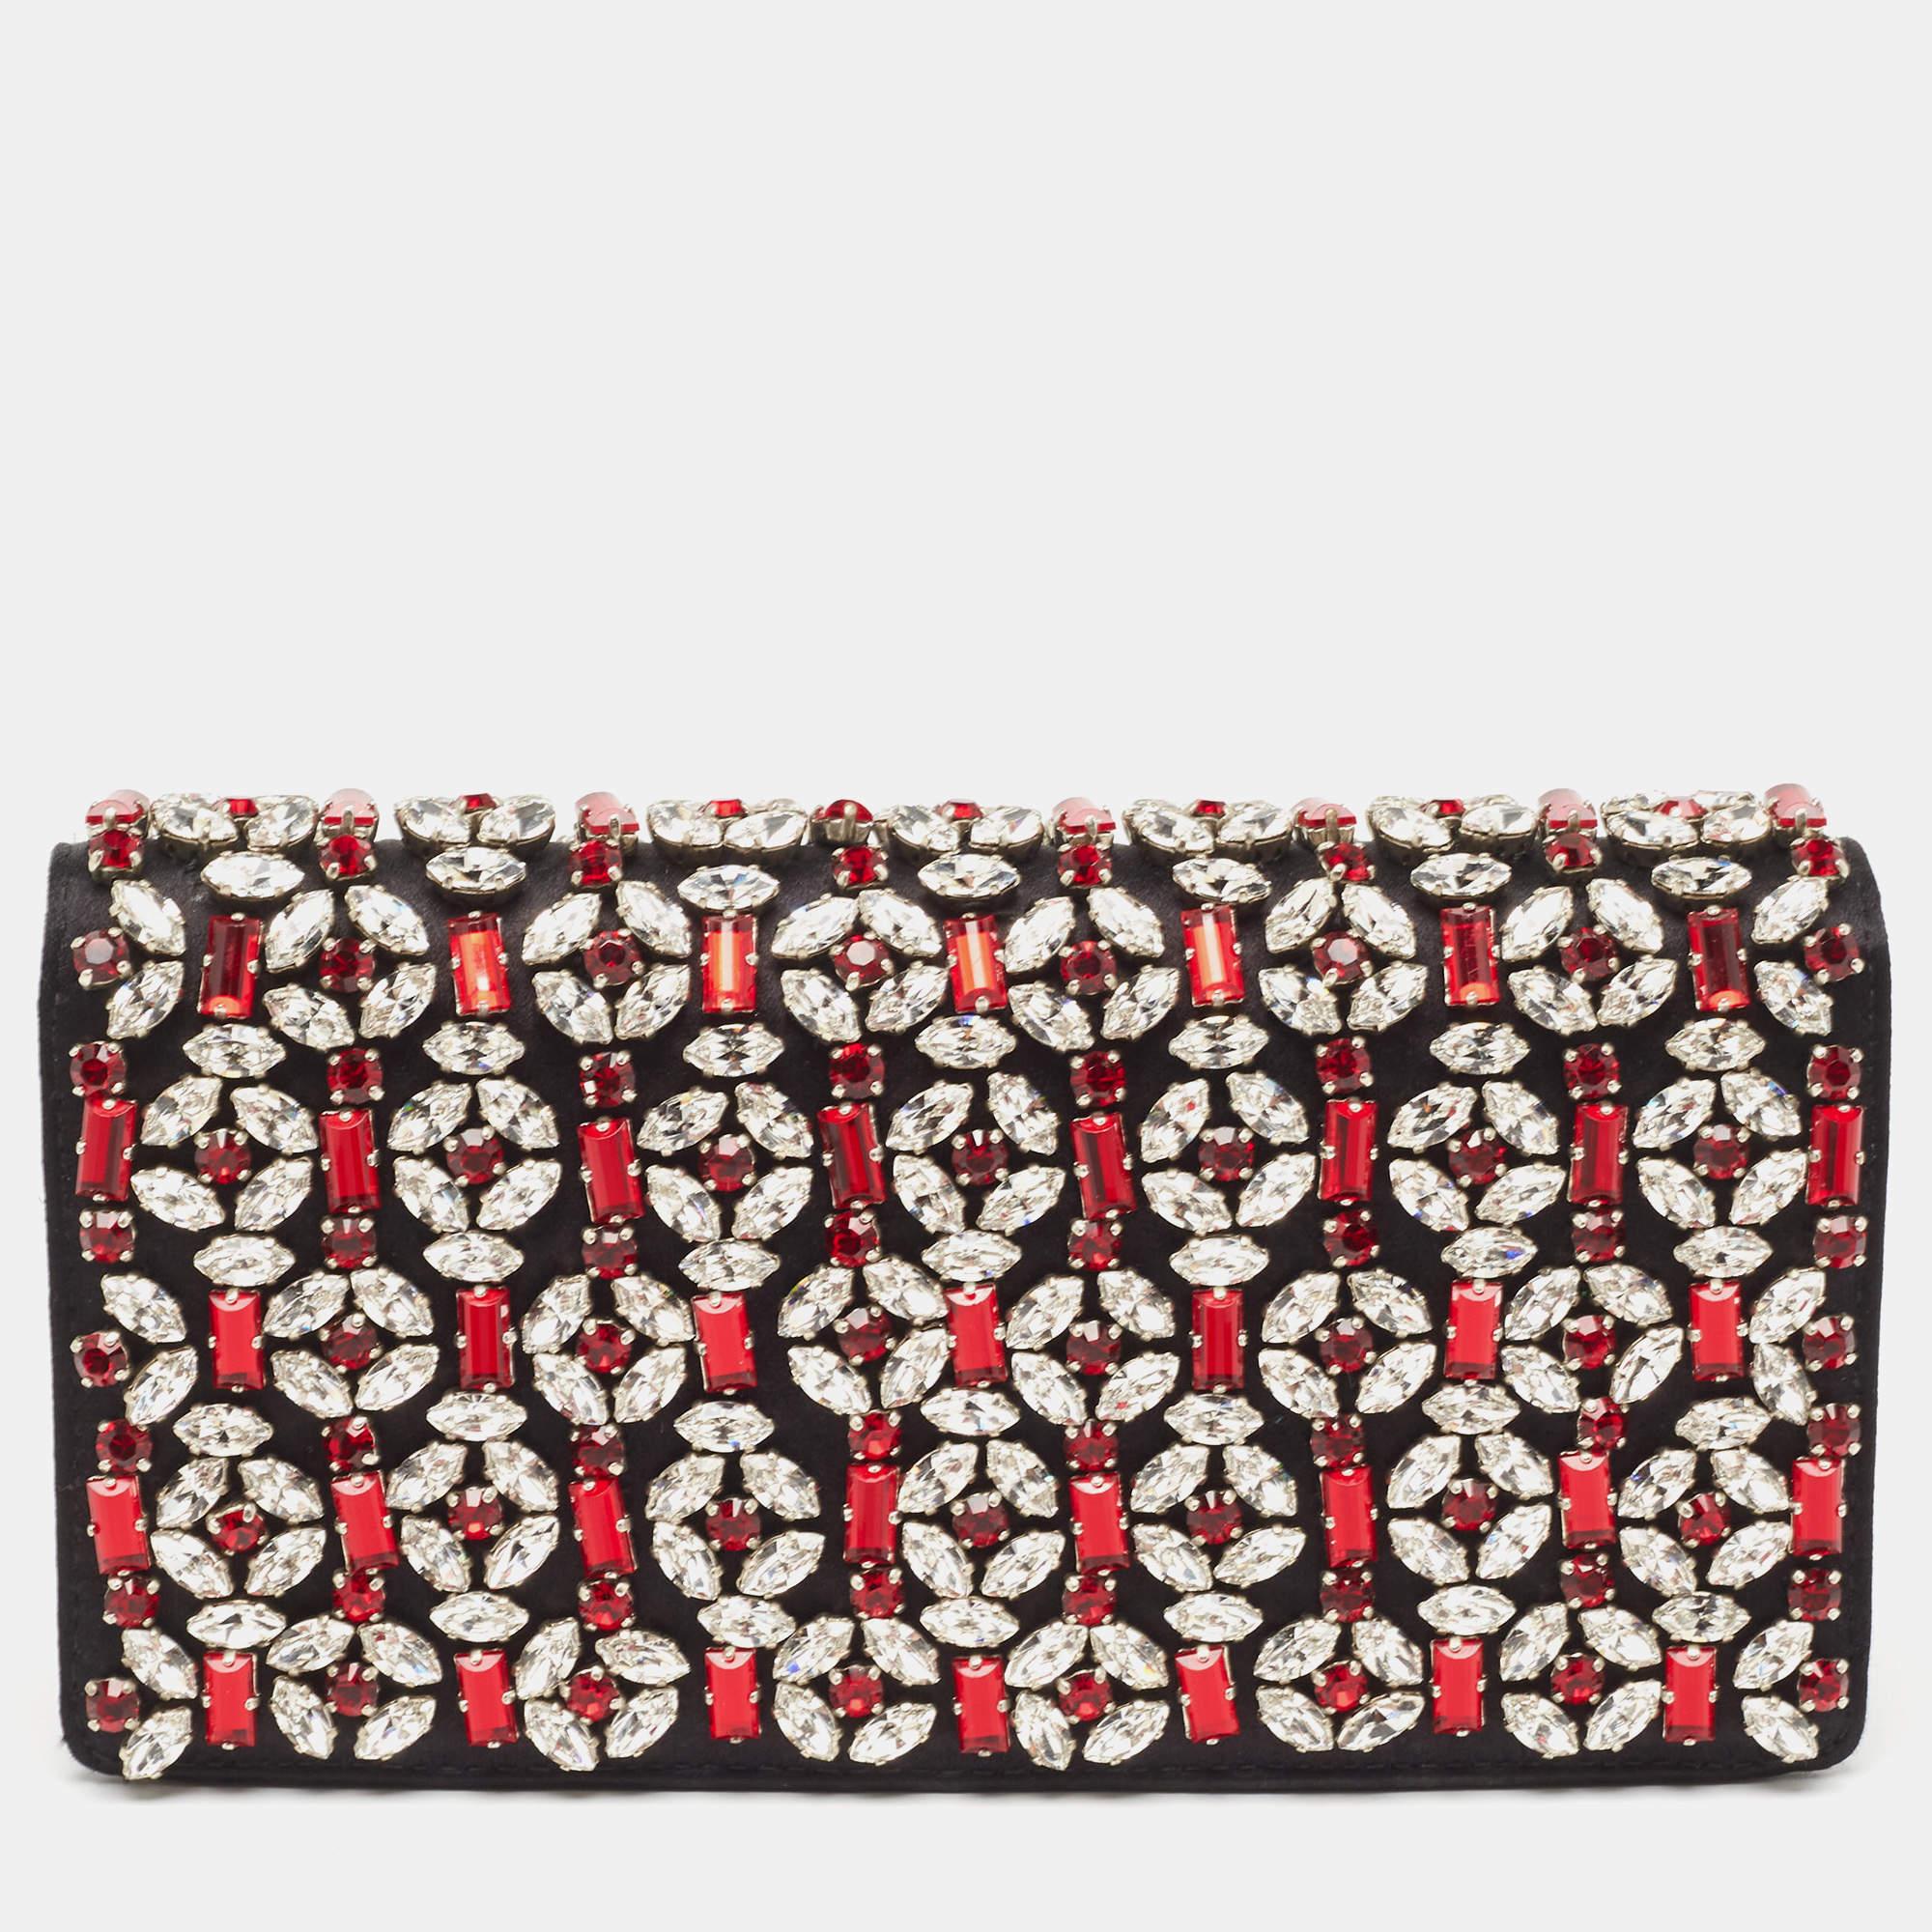 This Prada clutch is a creation marked by excellent craftsmanship and refined style. This flap-style clutch is crafted with skill and impeccably finished to be a luxurious accessory in your hand.

